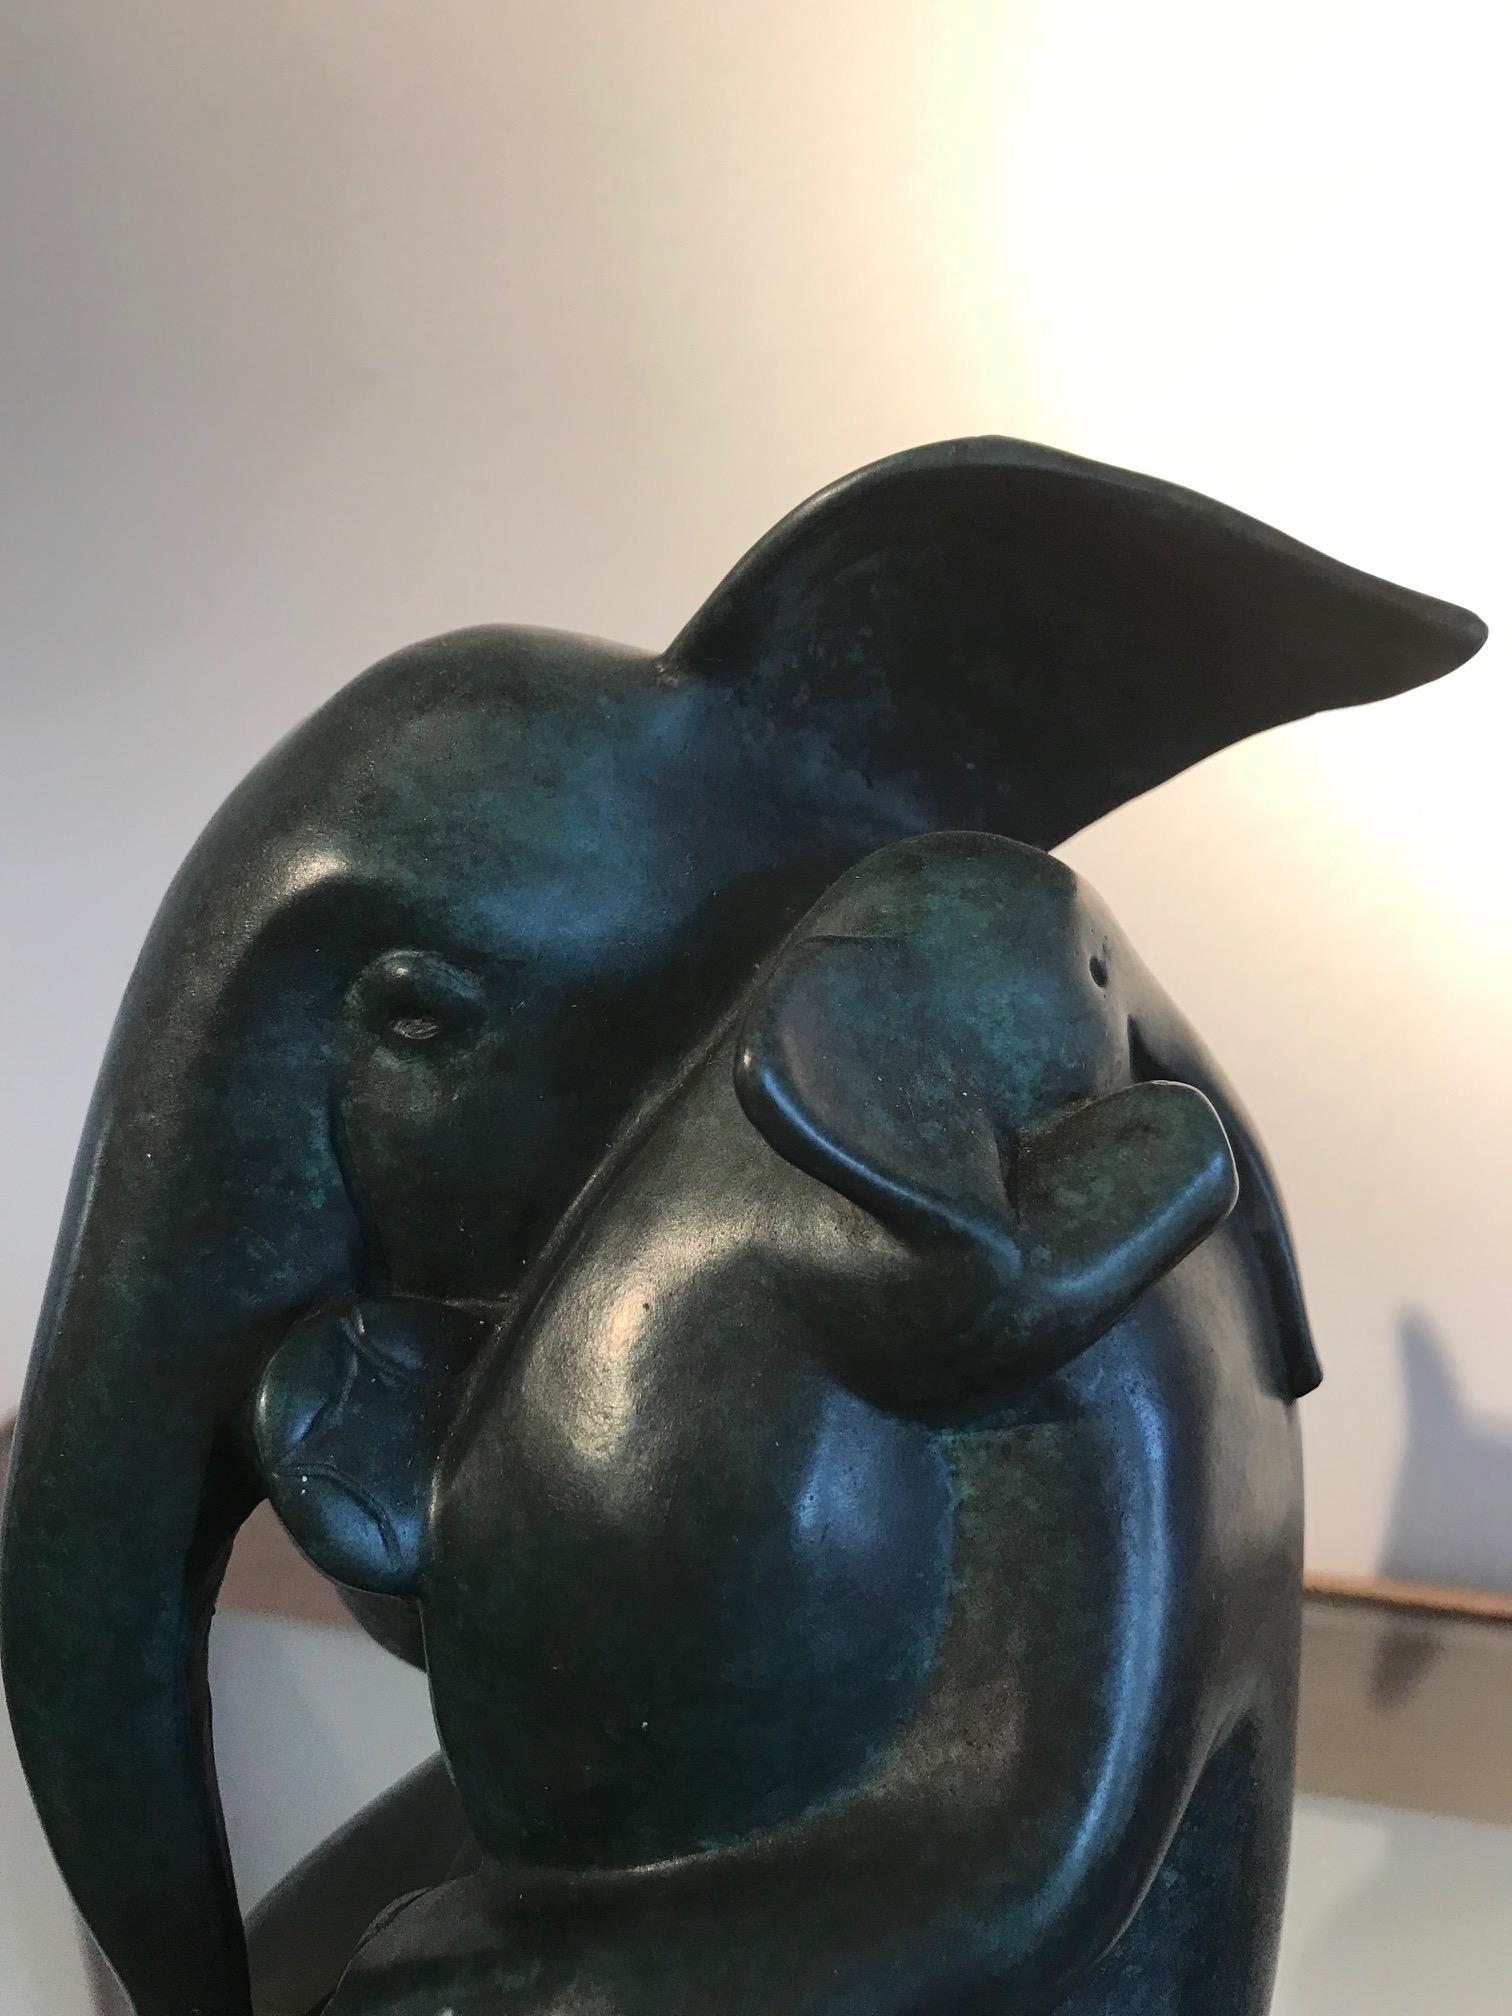 The optimistic bronze sculptures of Dutch artist Miep Maarse (1945) are a feast for the eyes. Dancing elephants, bathing hippos and playing bears characterize her oeuvre. The images are optimistic in tone and message. Through her images she shows us